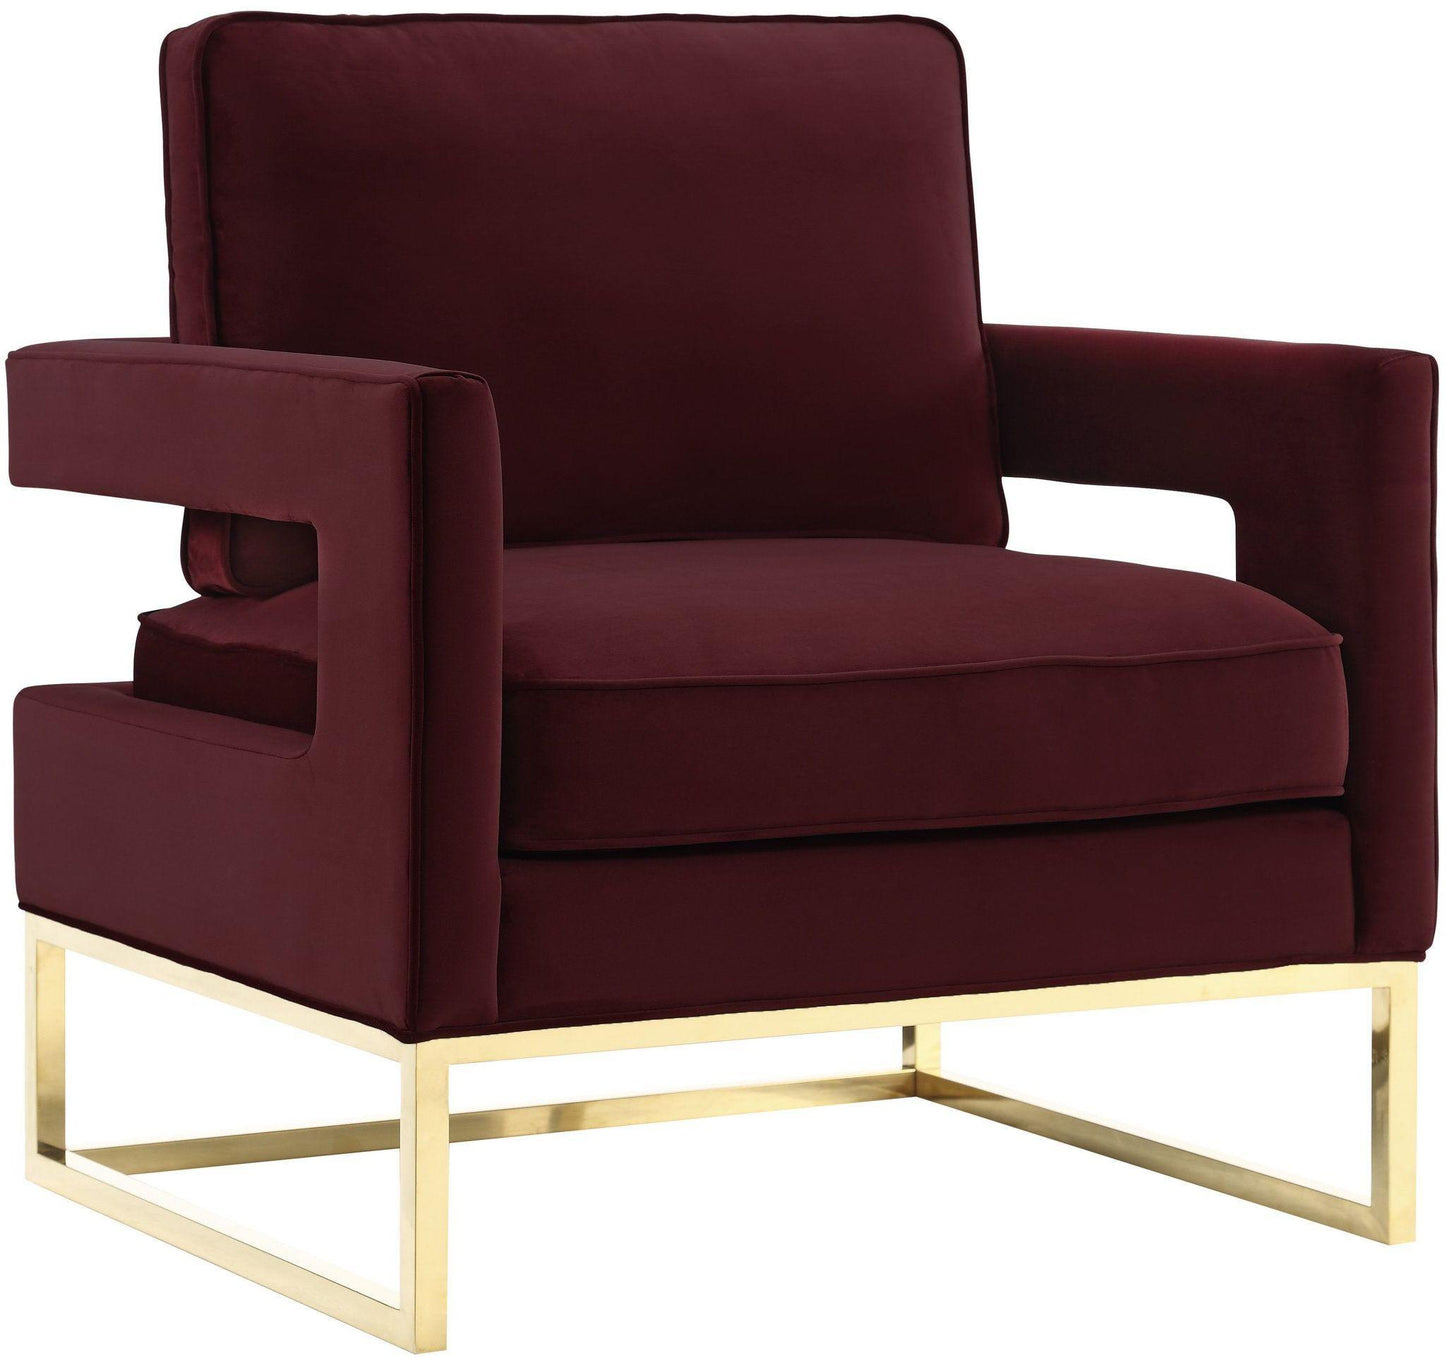 Tov Furniture Avery Maroon Velvet Chair With Polished Gold Base